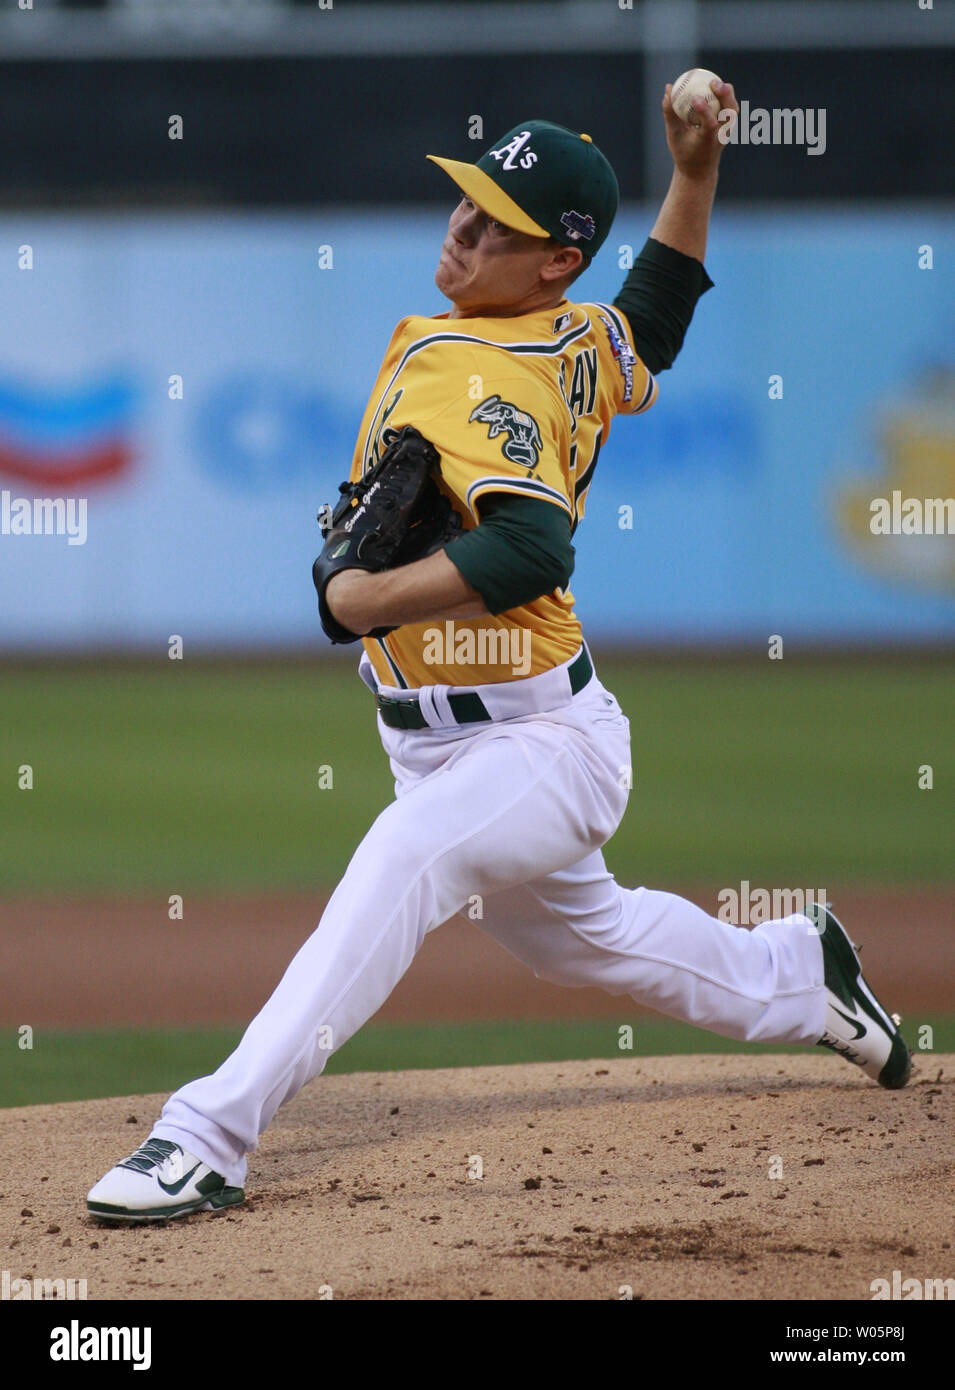 Oakland A's Sonny Gray throws against the Detroit Tigers in a pitching duel in game 2 of the American League Division Series at O.co Coliseum in Oakland, California on October 5, 2013.The A's won 1-0 in the bottom of the ninth.     UPI/Bruce Gordon Stock Photo